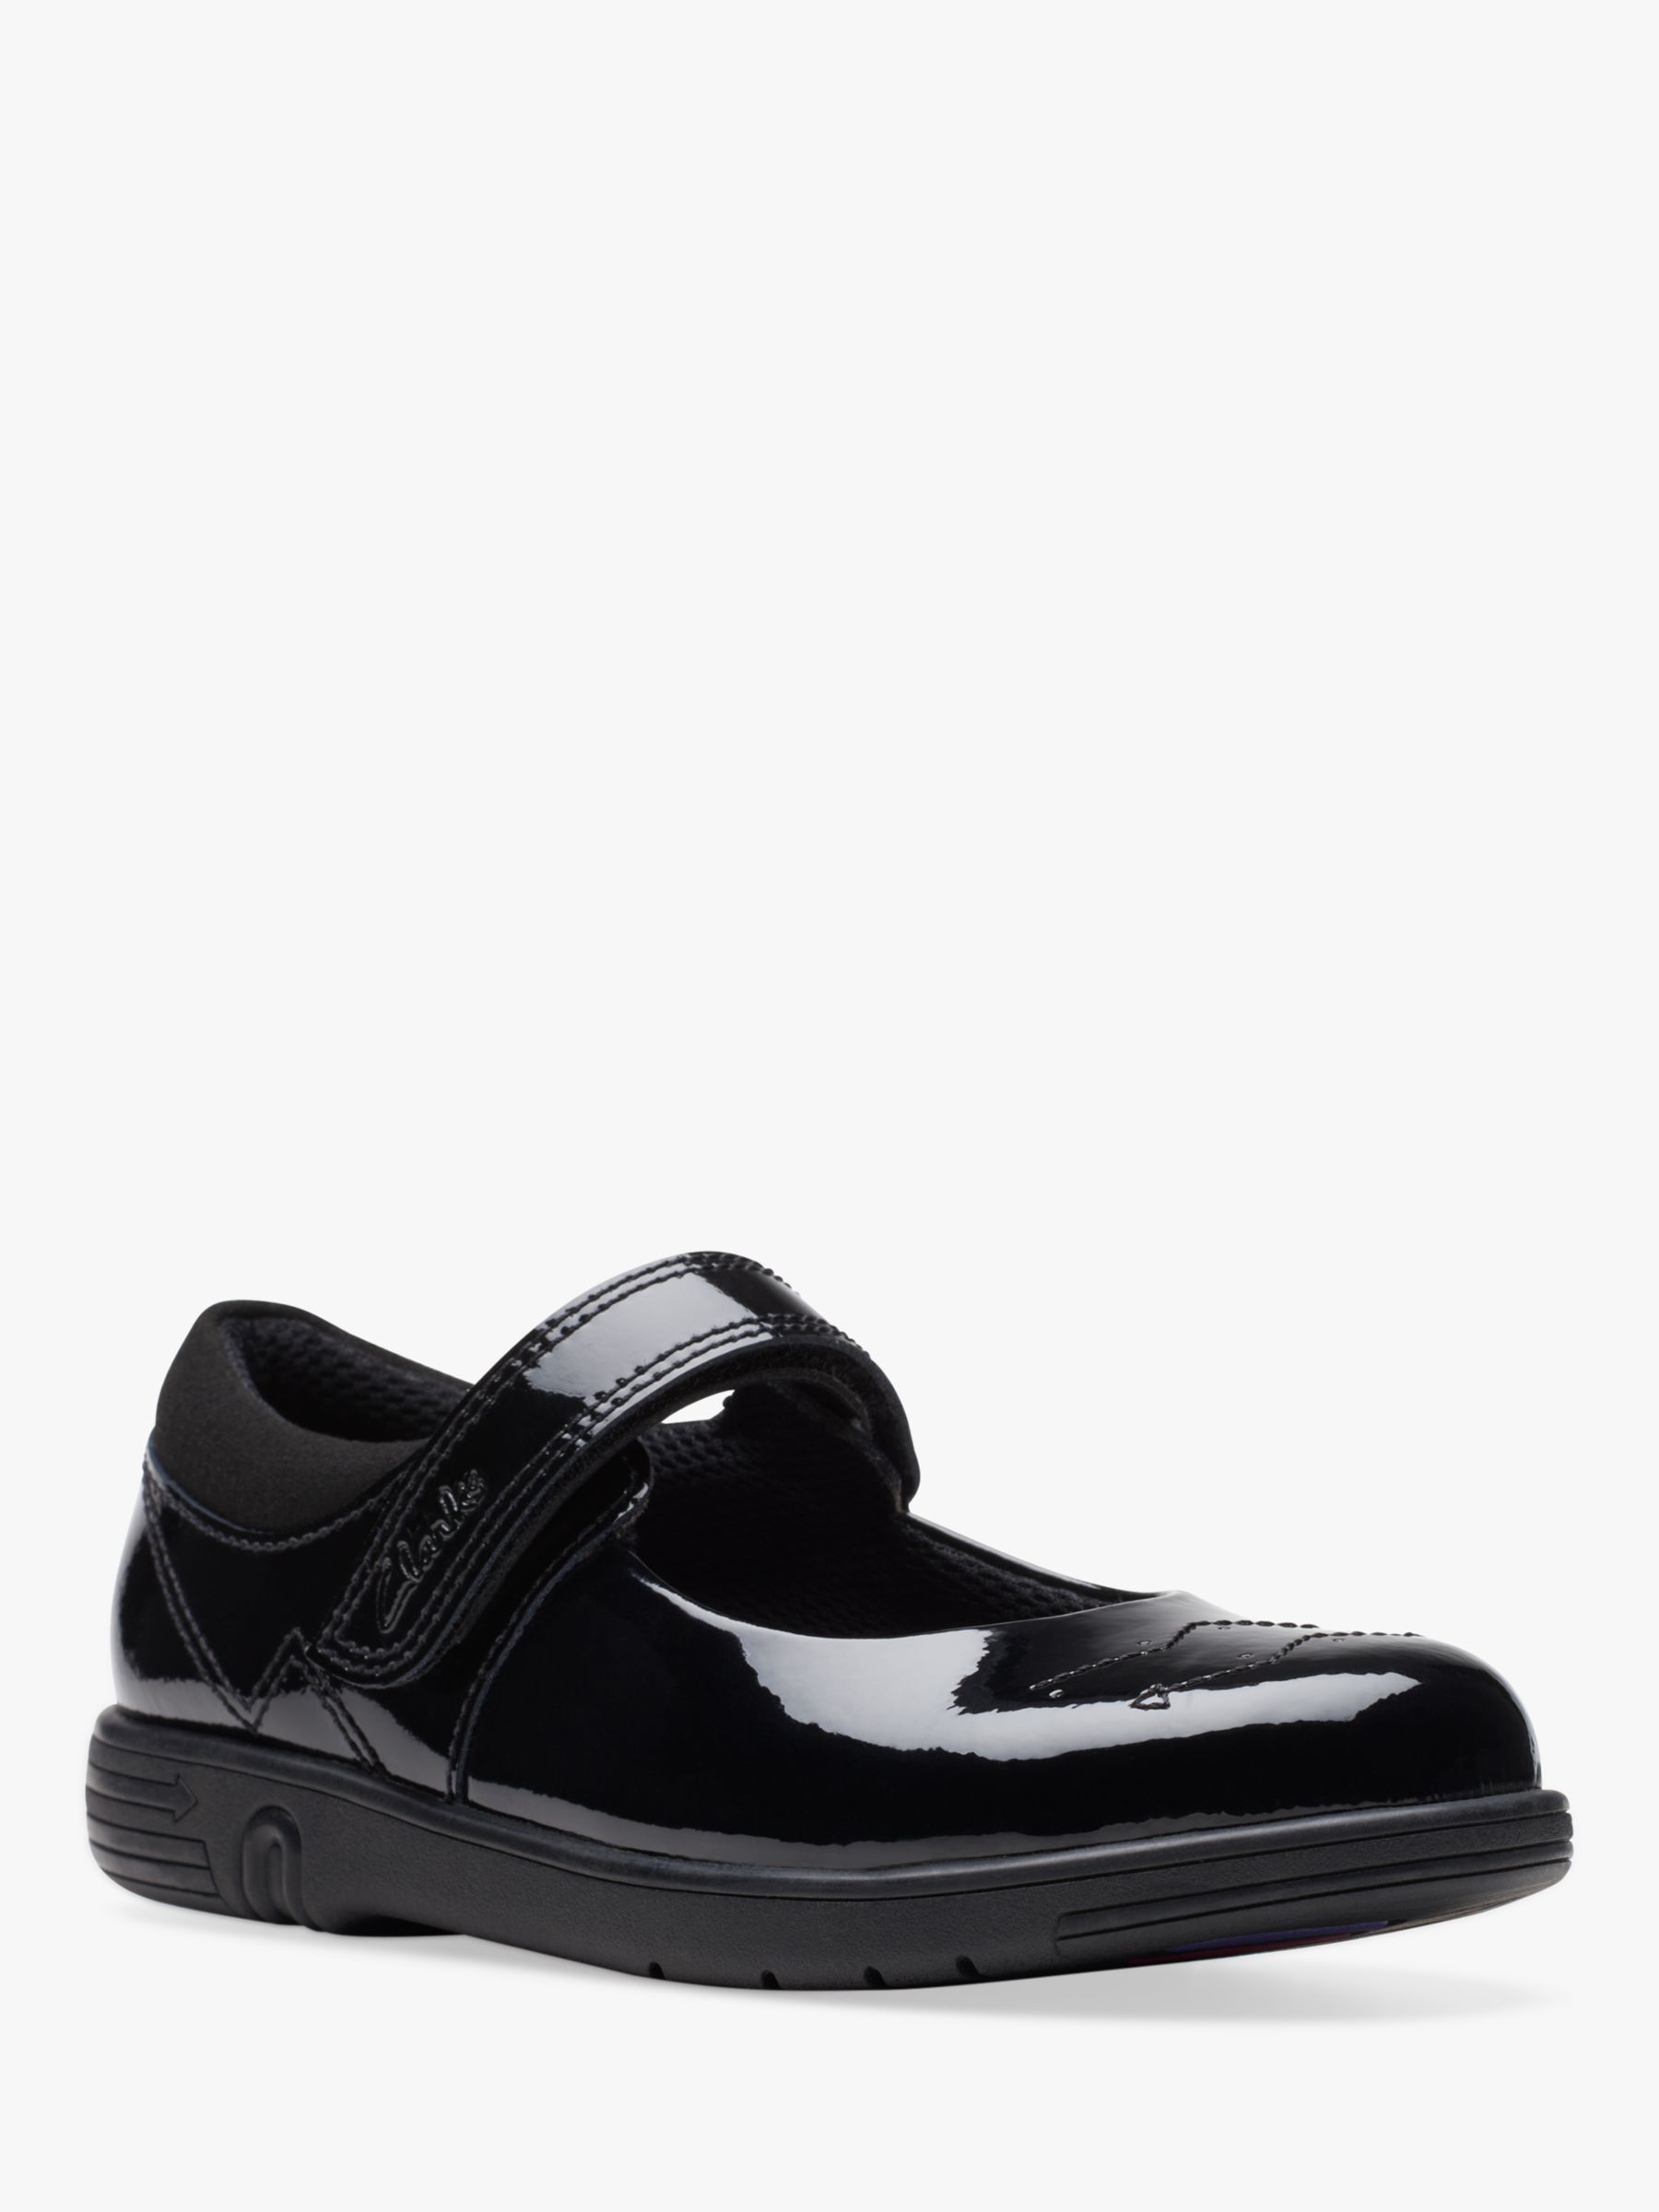 Clarks Kids' Jazzy Jig School Shoes, Black Patent at John Lewis & Partners